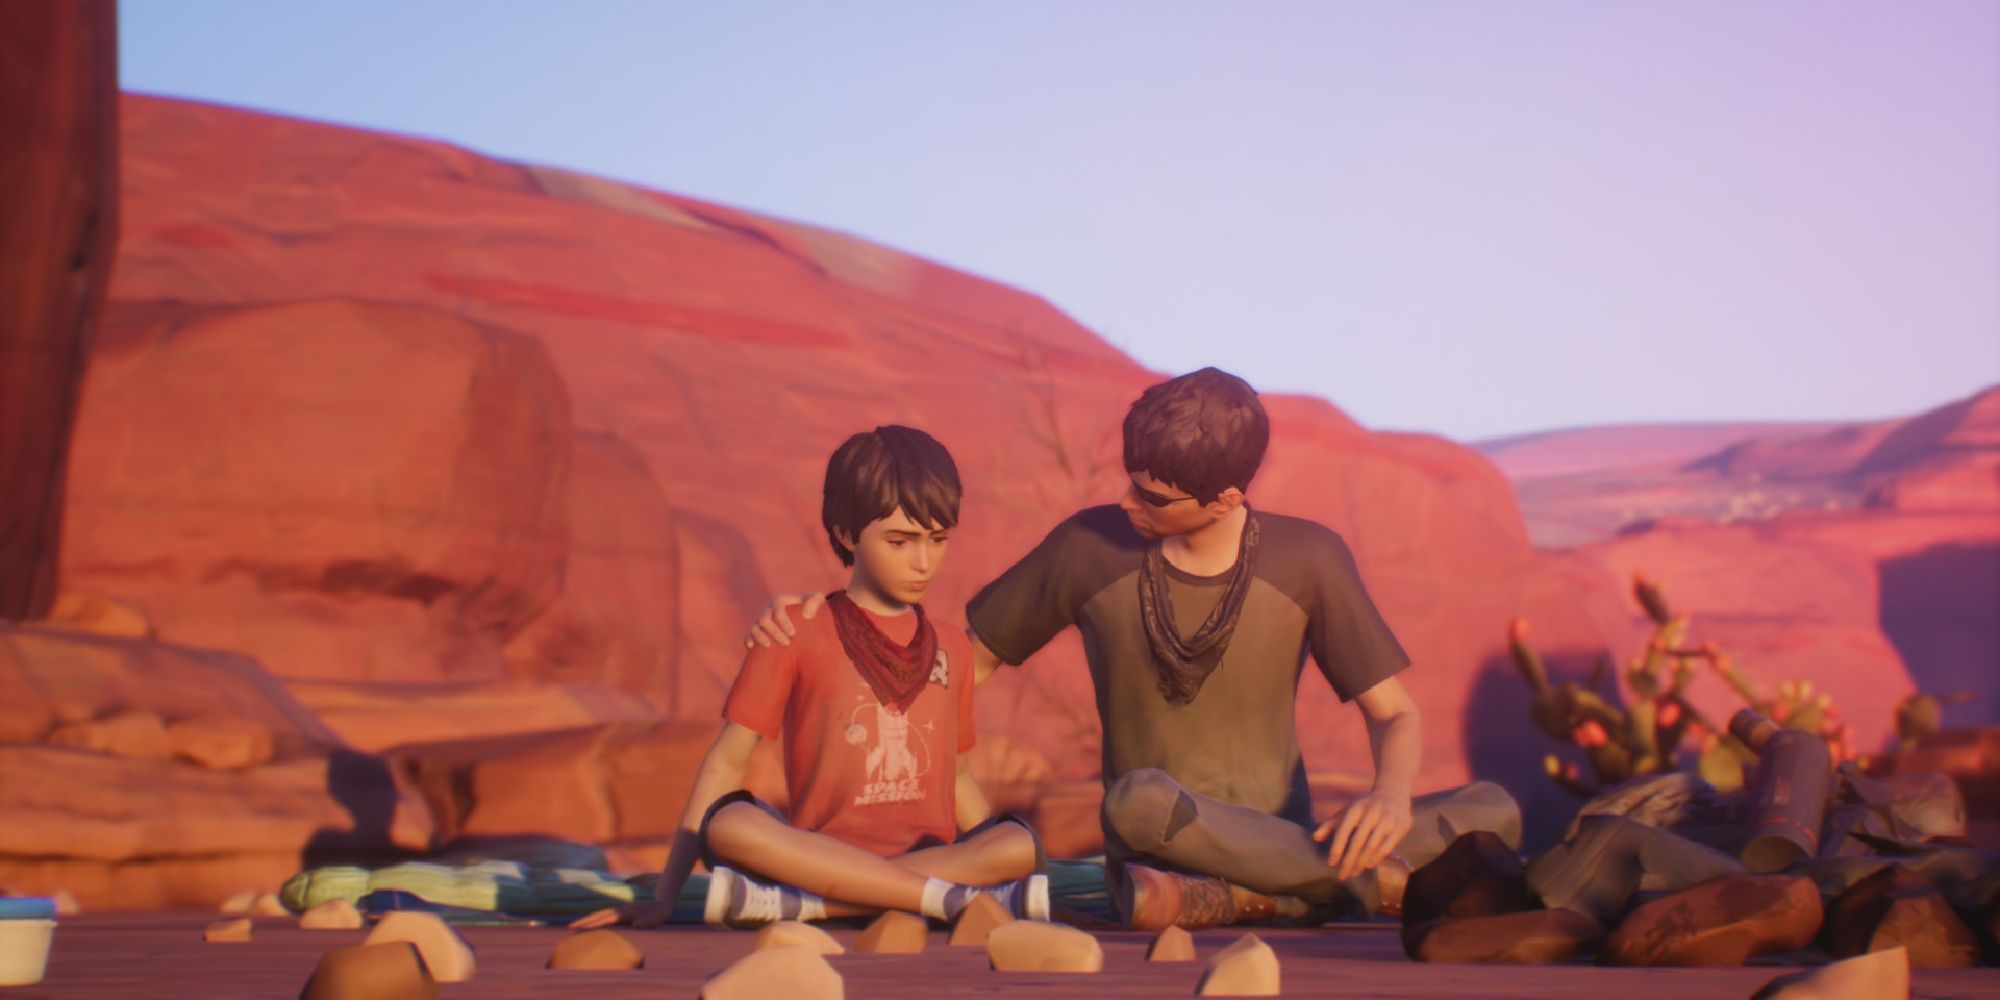 The two brothers from Life is Strange 2 sitting side by side on the ground, the older brother comforting his younger. 